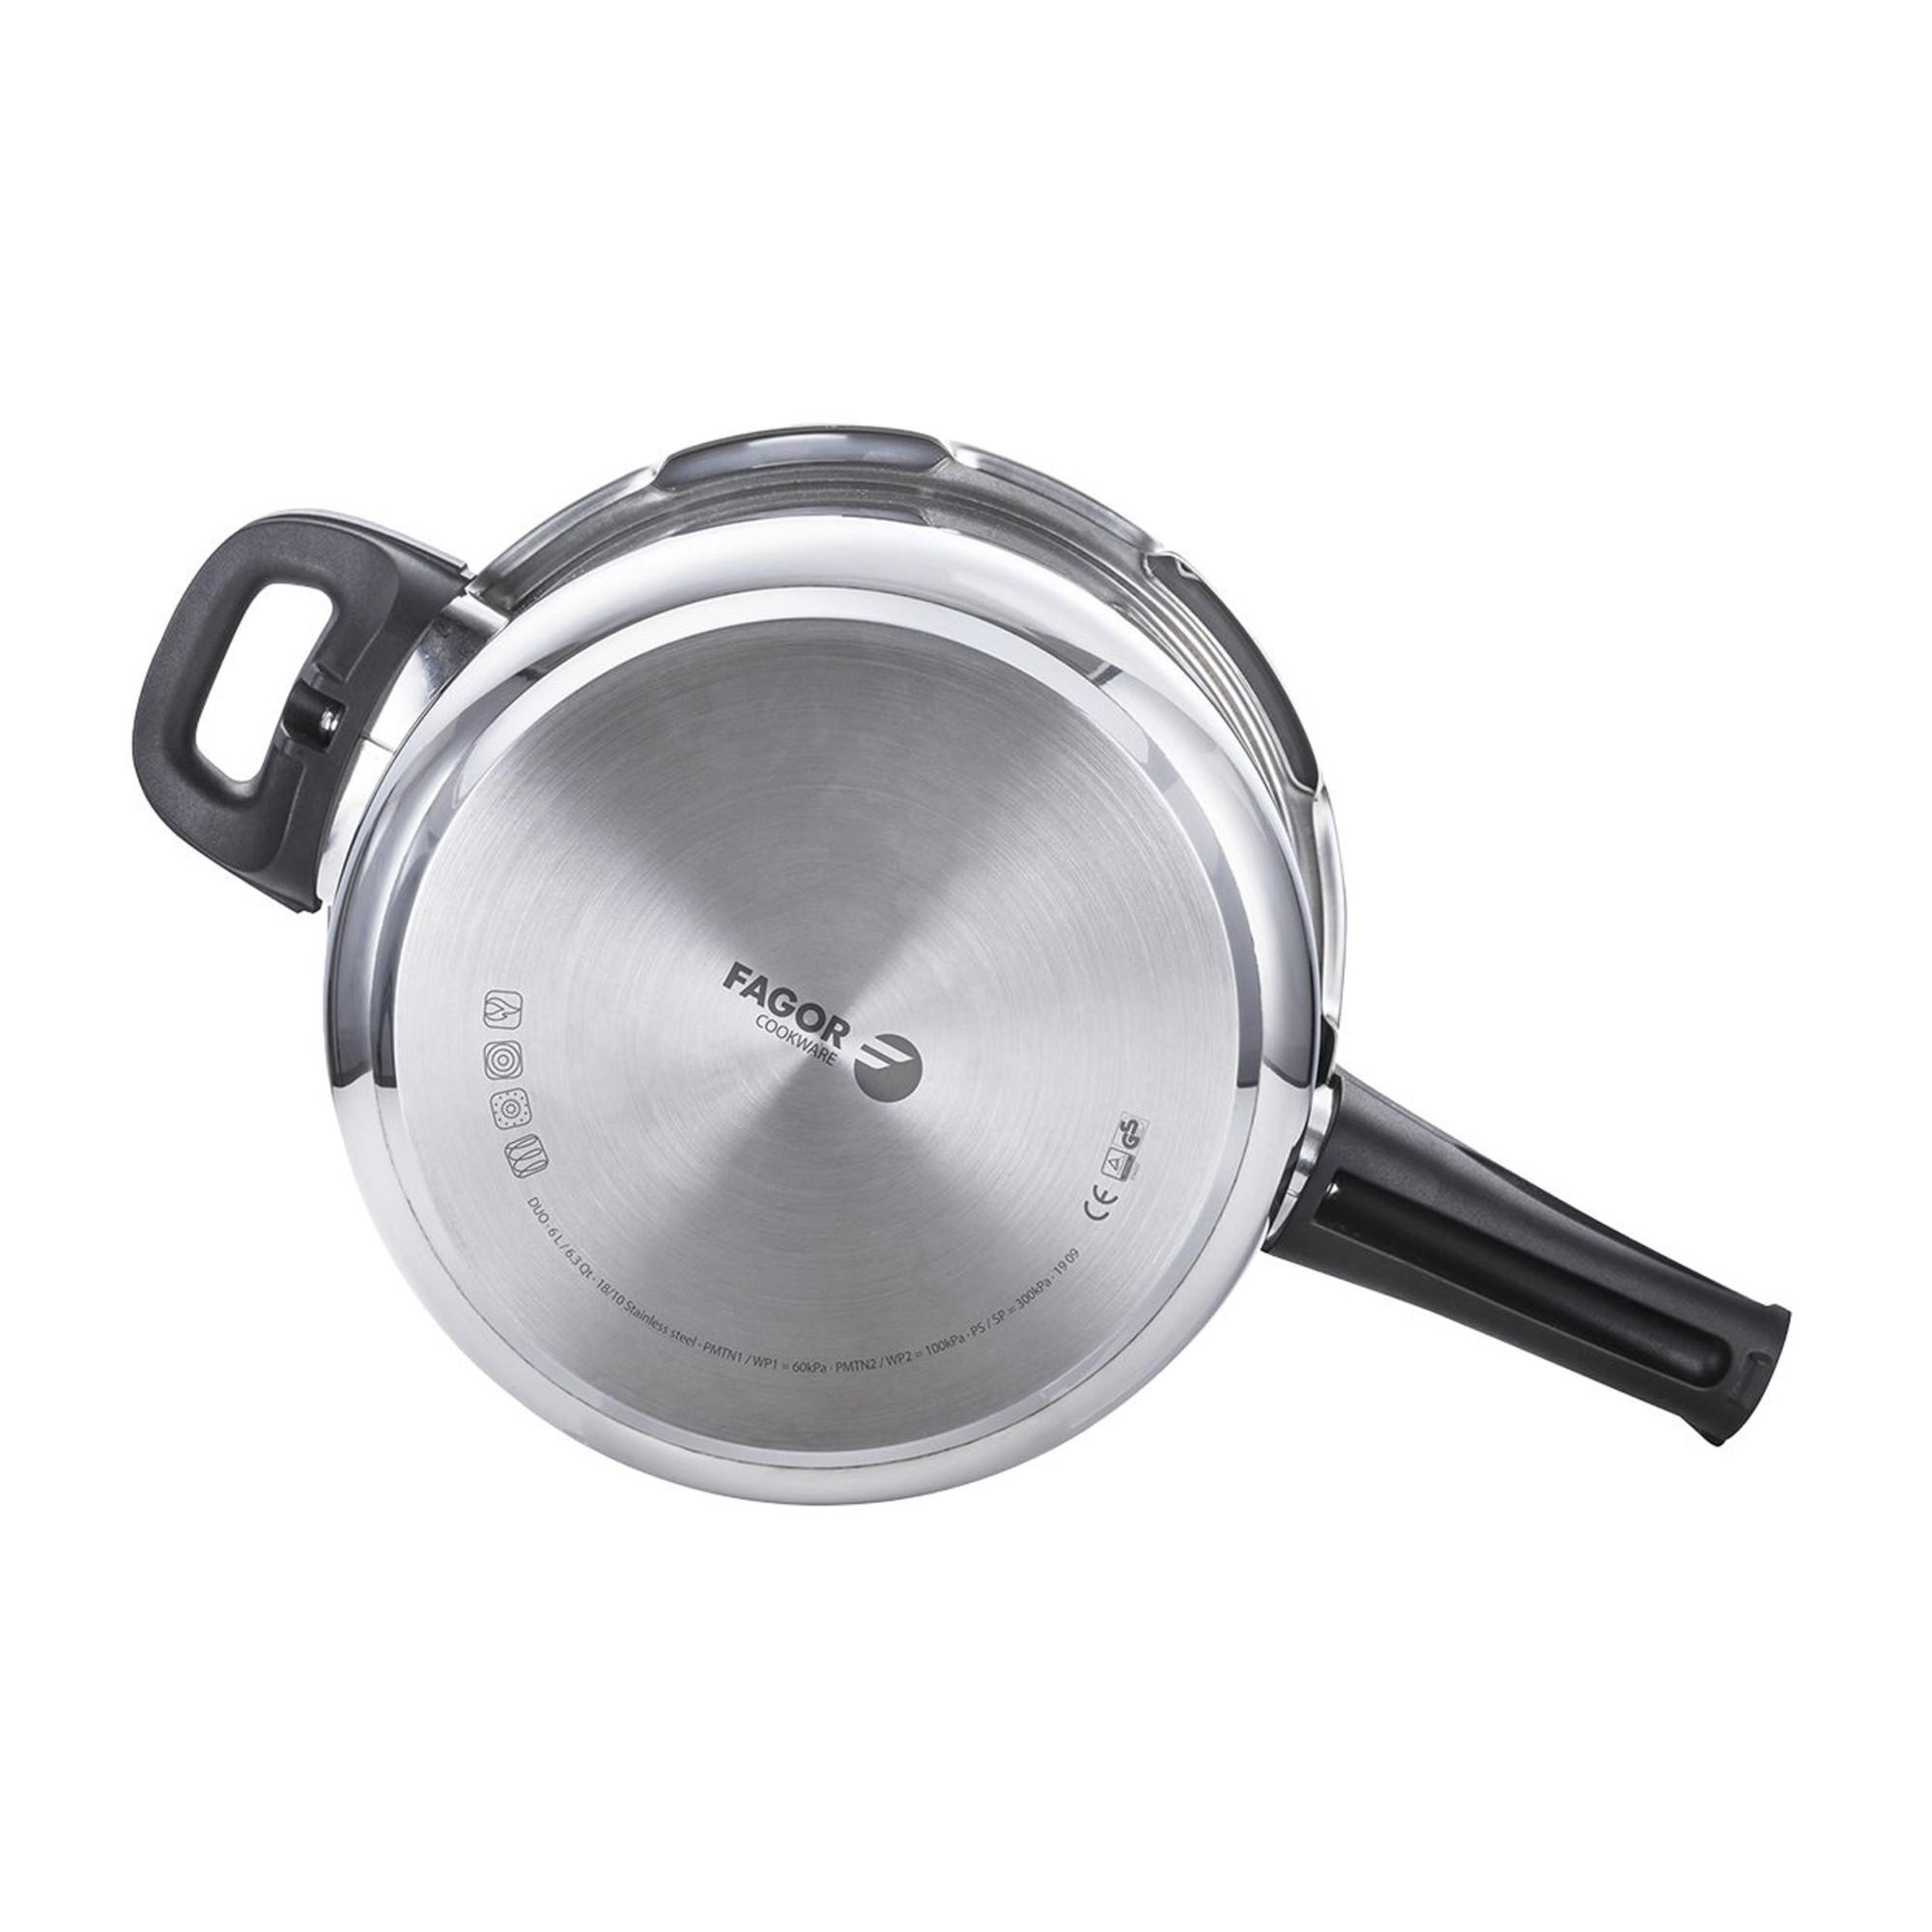 Fagor Duo Stainless Steel Pressure Cooker 4L Image 4